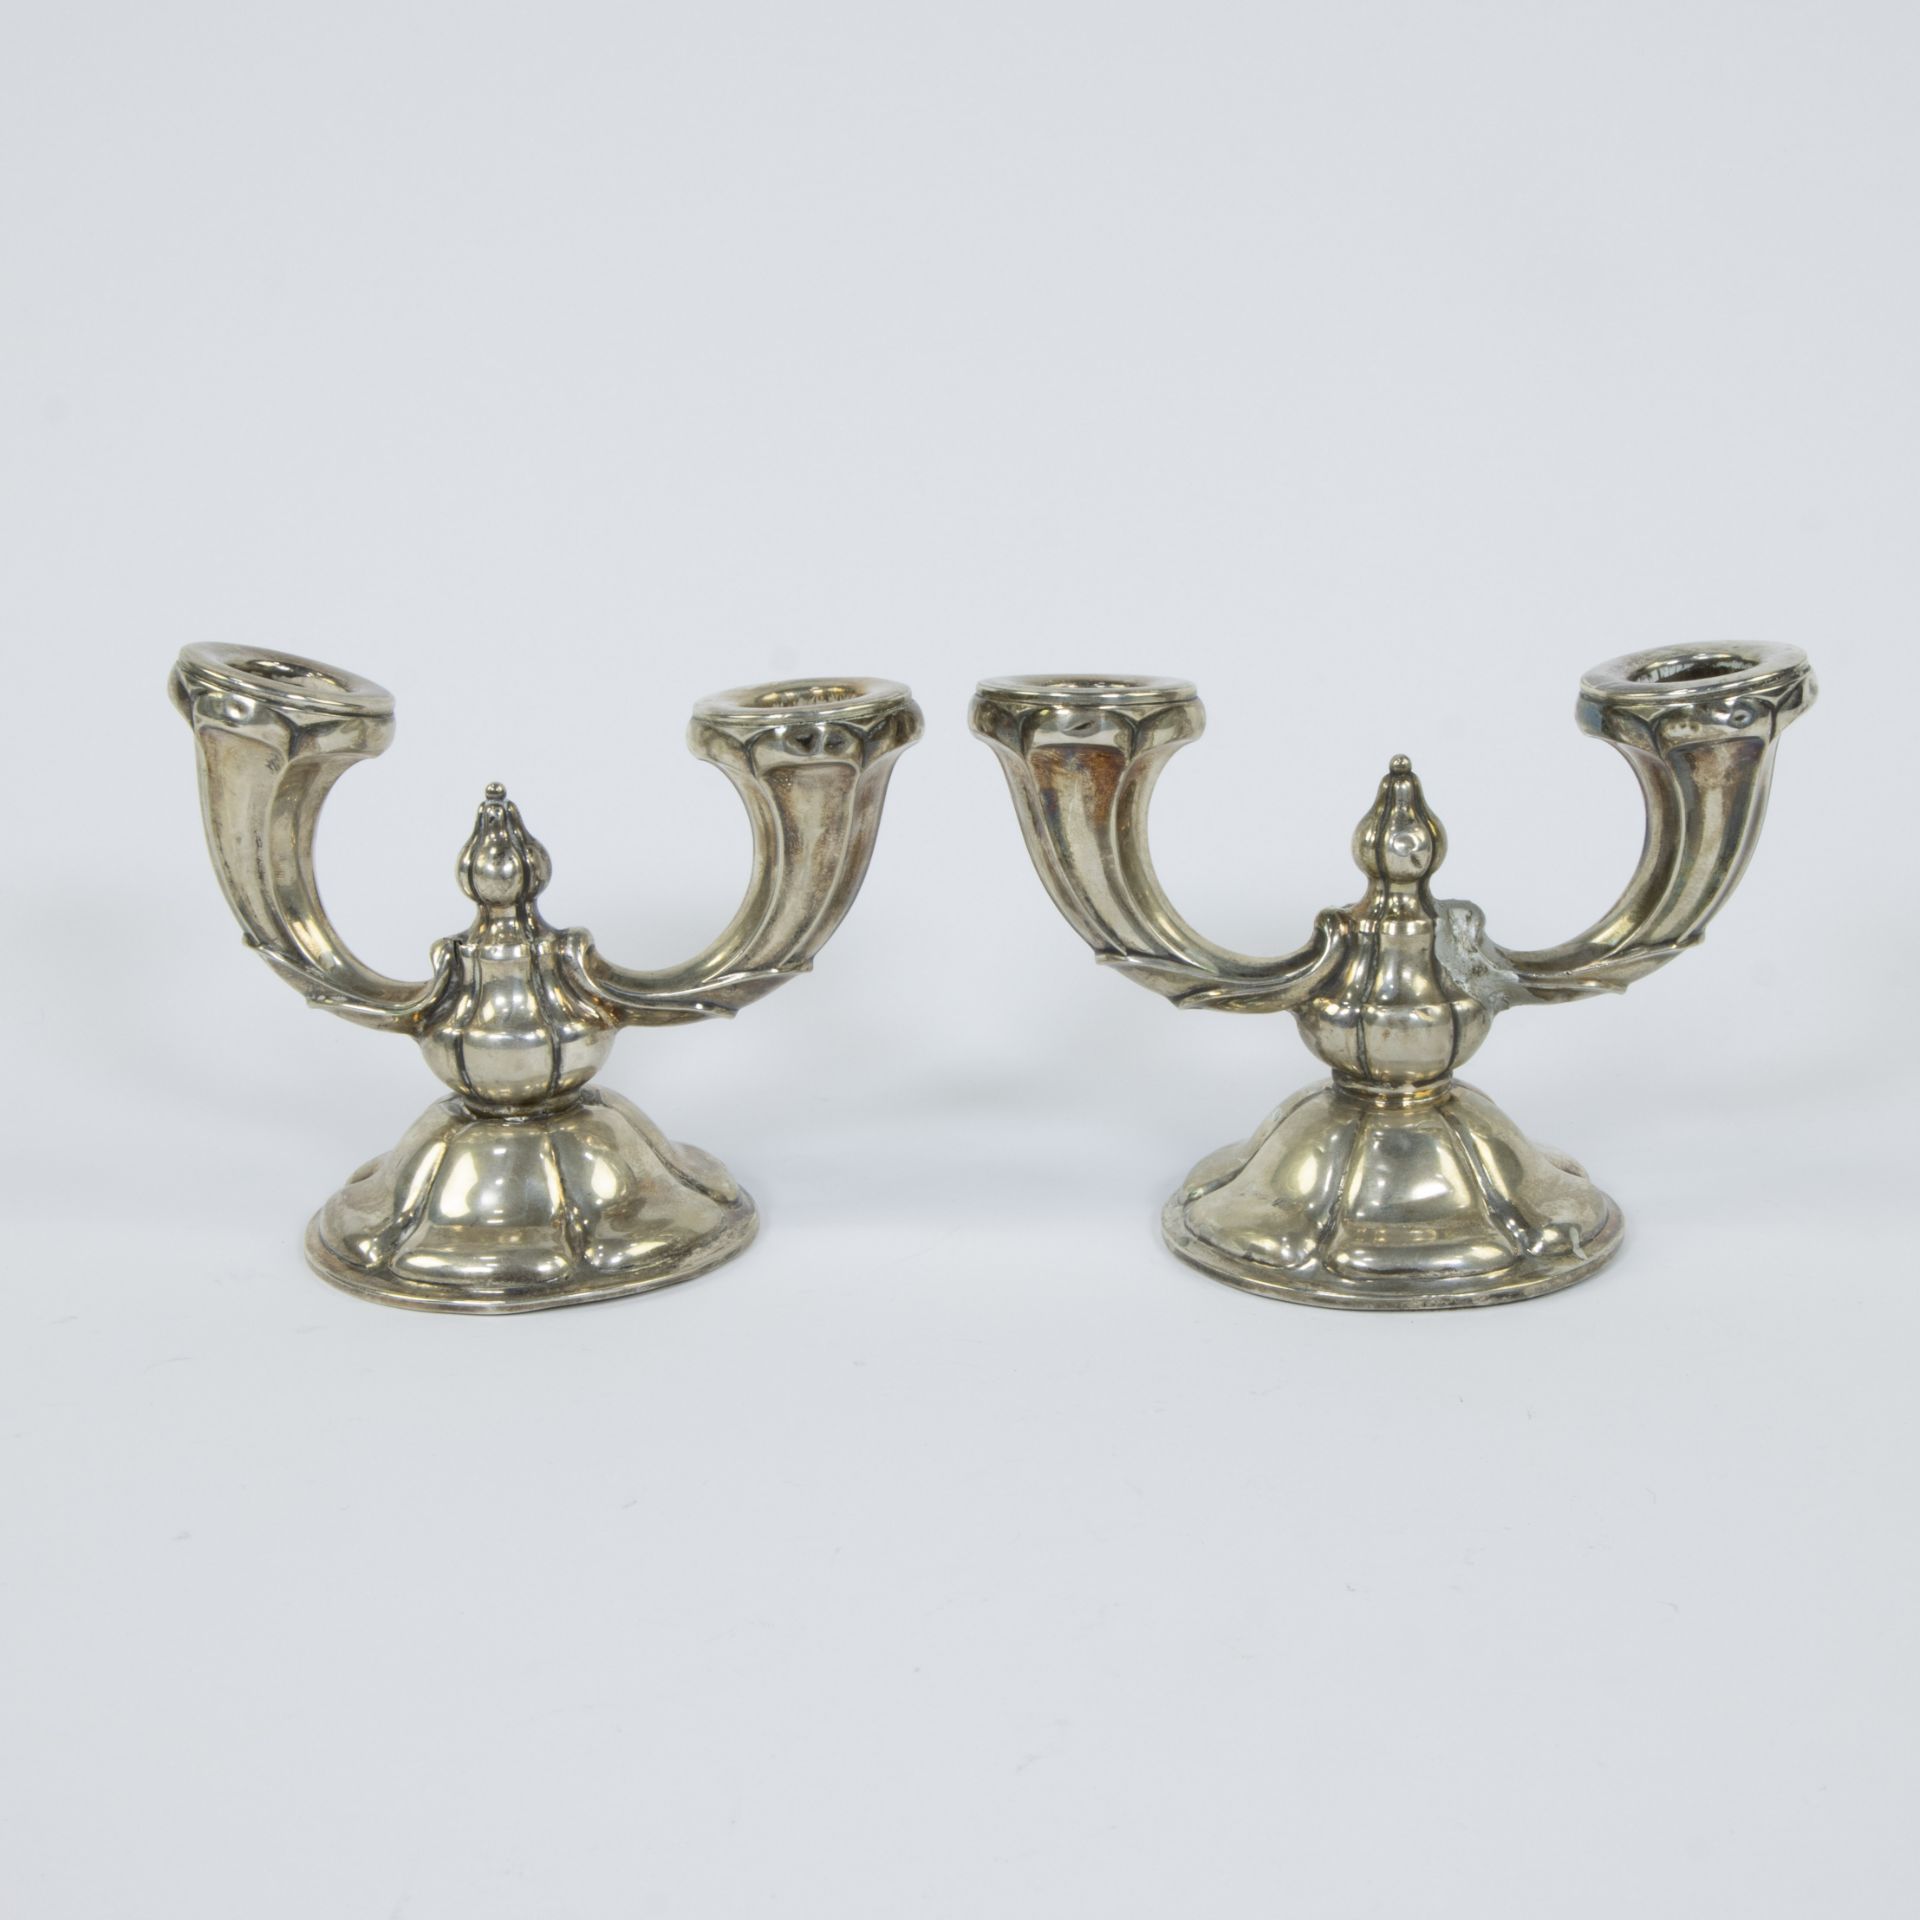 Silver lot, tray (Elite racing 1973) silver 925 and pair of candlesticks silver 830 - Image 4 of 7